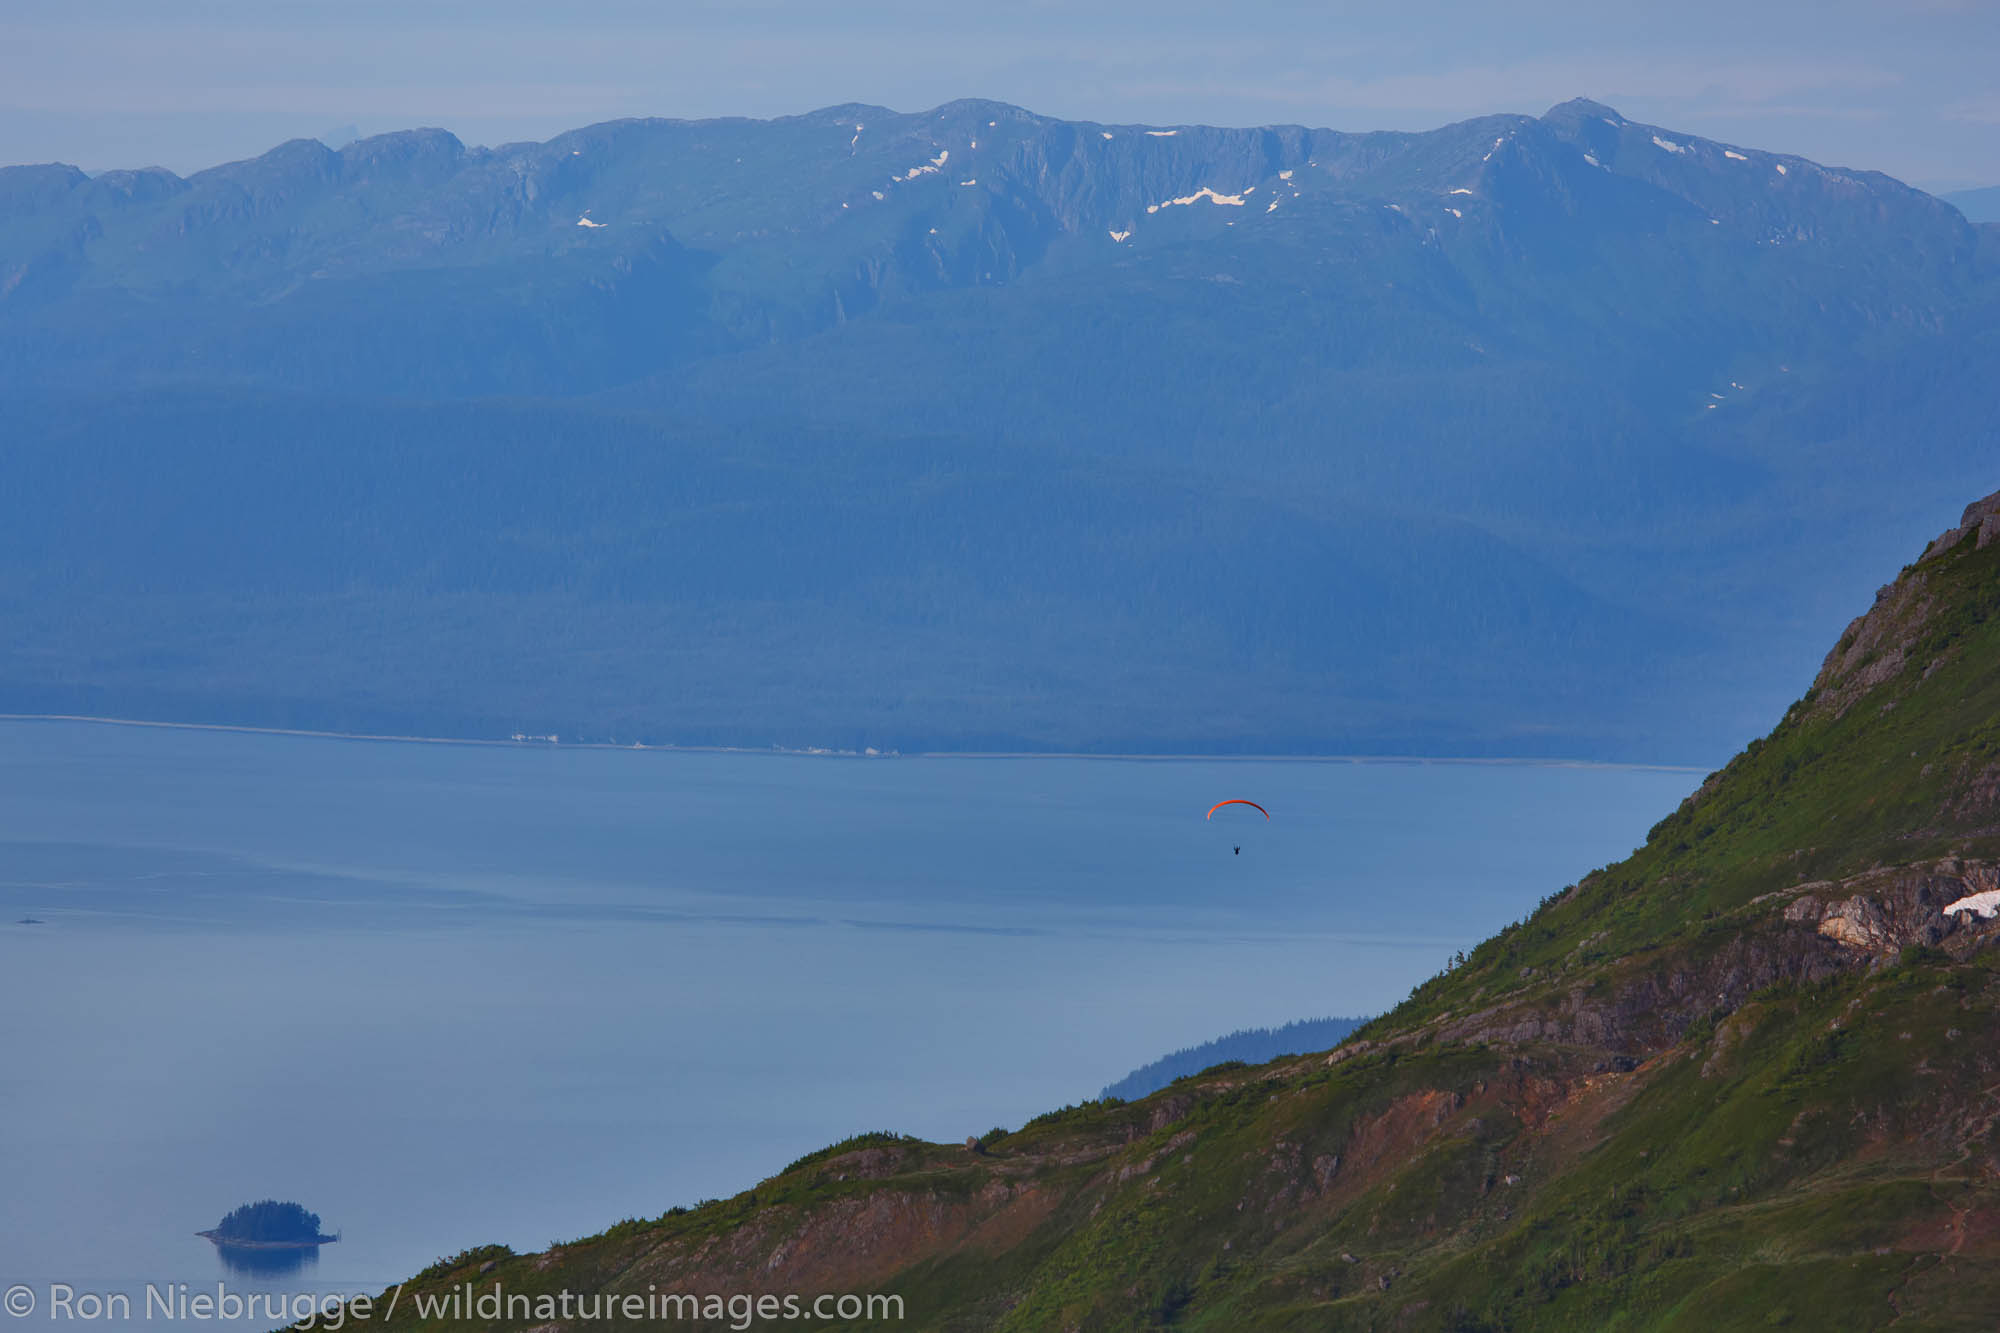 Paraglider viewed from Mount Stroller White above the Mendenhall Glacier, Tongass National Forest, Alaska.